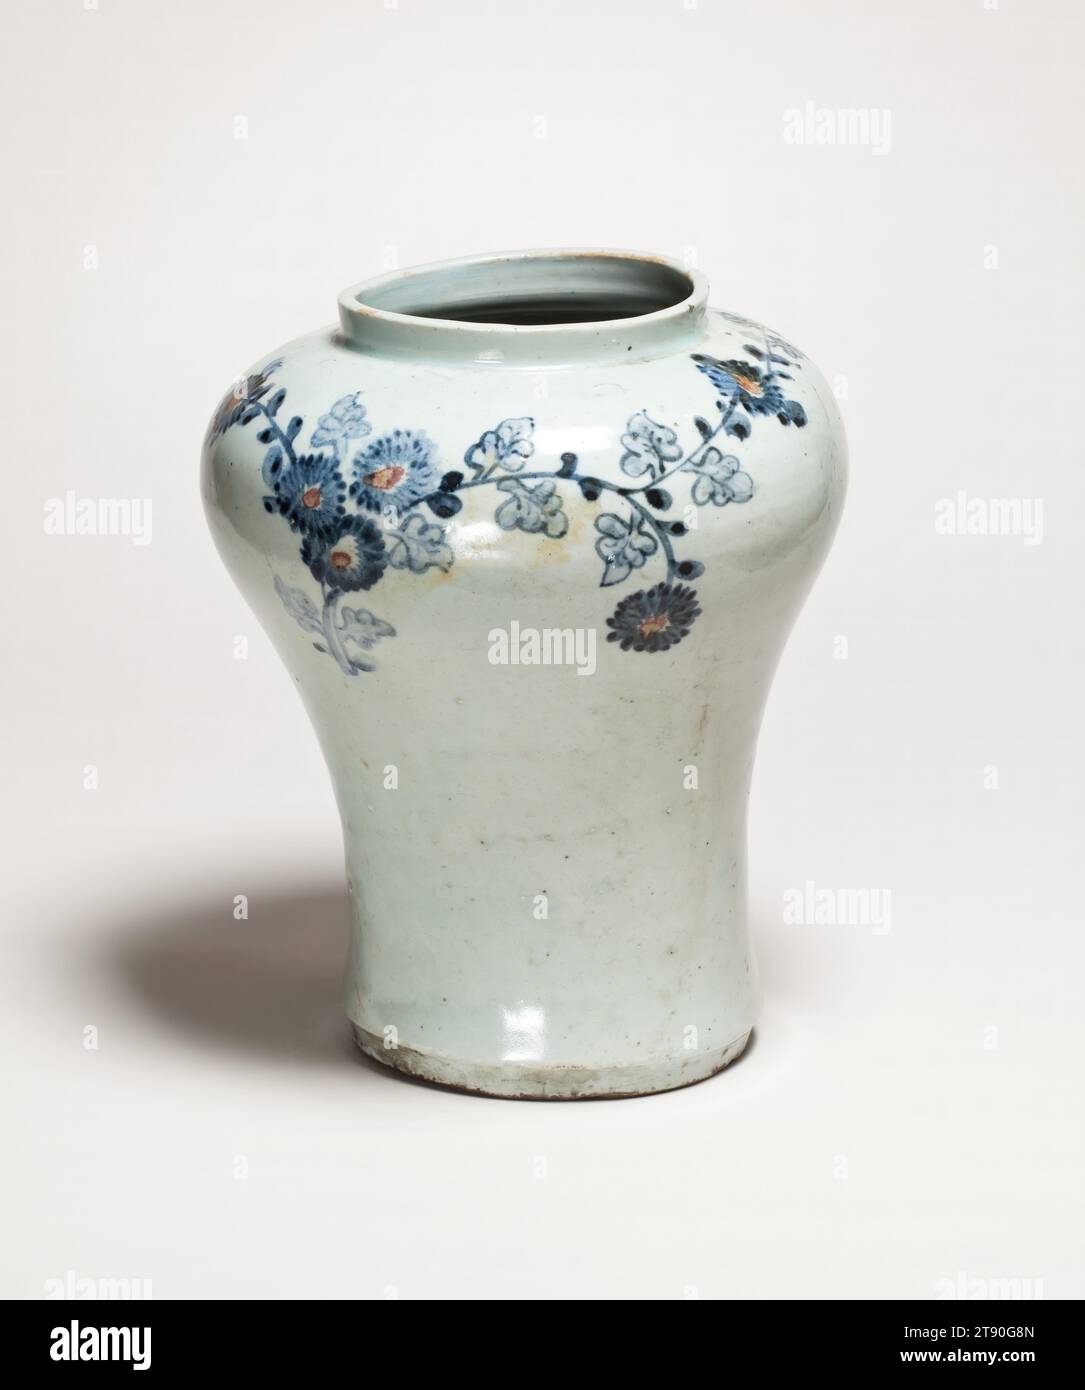 Tall Vase with chrysanthemum and bamboo design, early 20th century, Unknown Korean, 9 7/8 × 8 × 8 in. (25.08 × 20.32 × 20.32 cm), Porcelain with cobalt-blue and copper-red design under clear glaze, Korea, 20th century Stock Photo